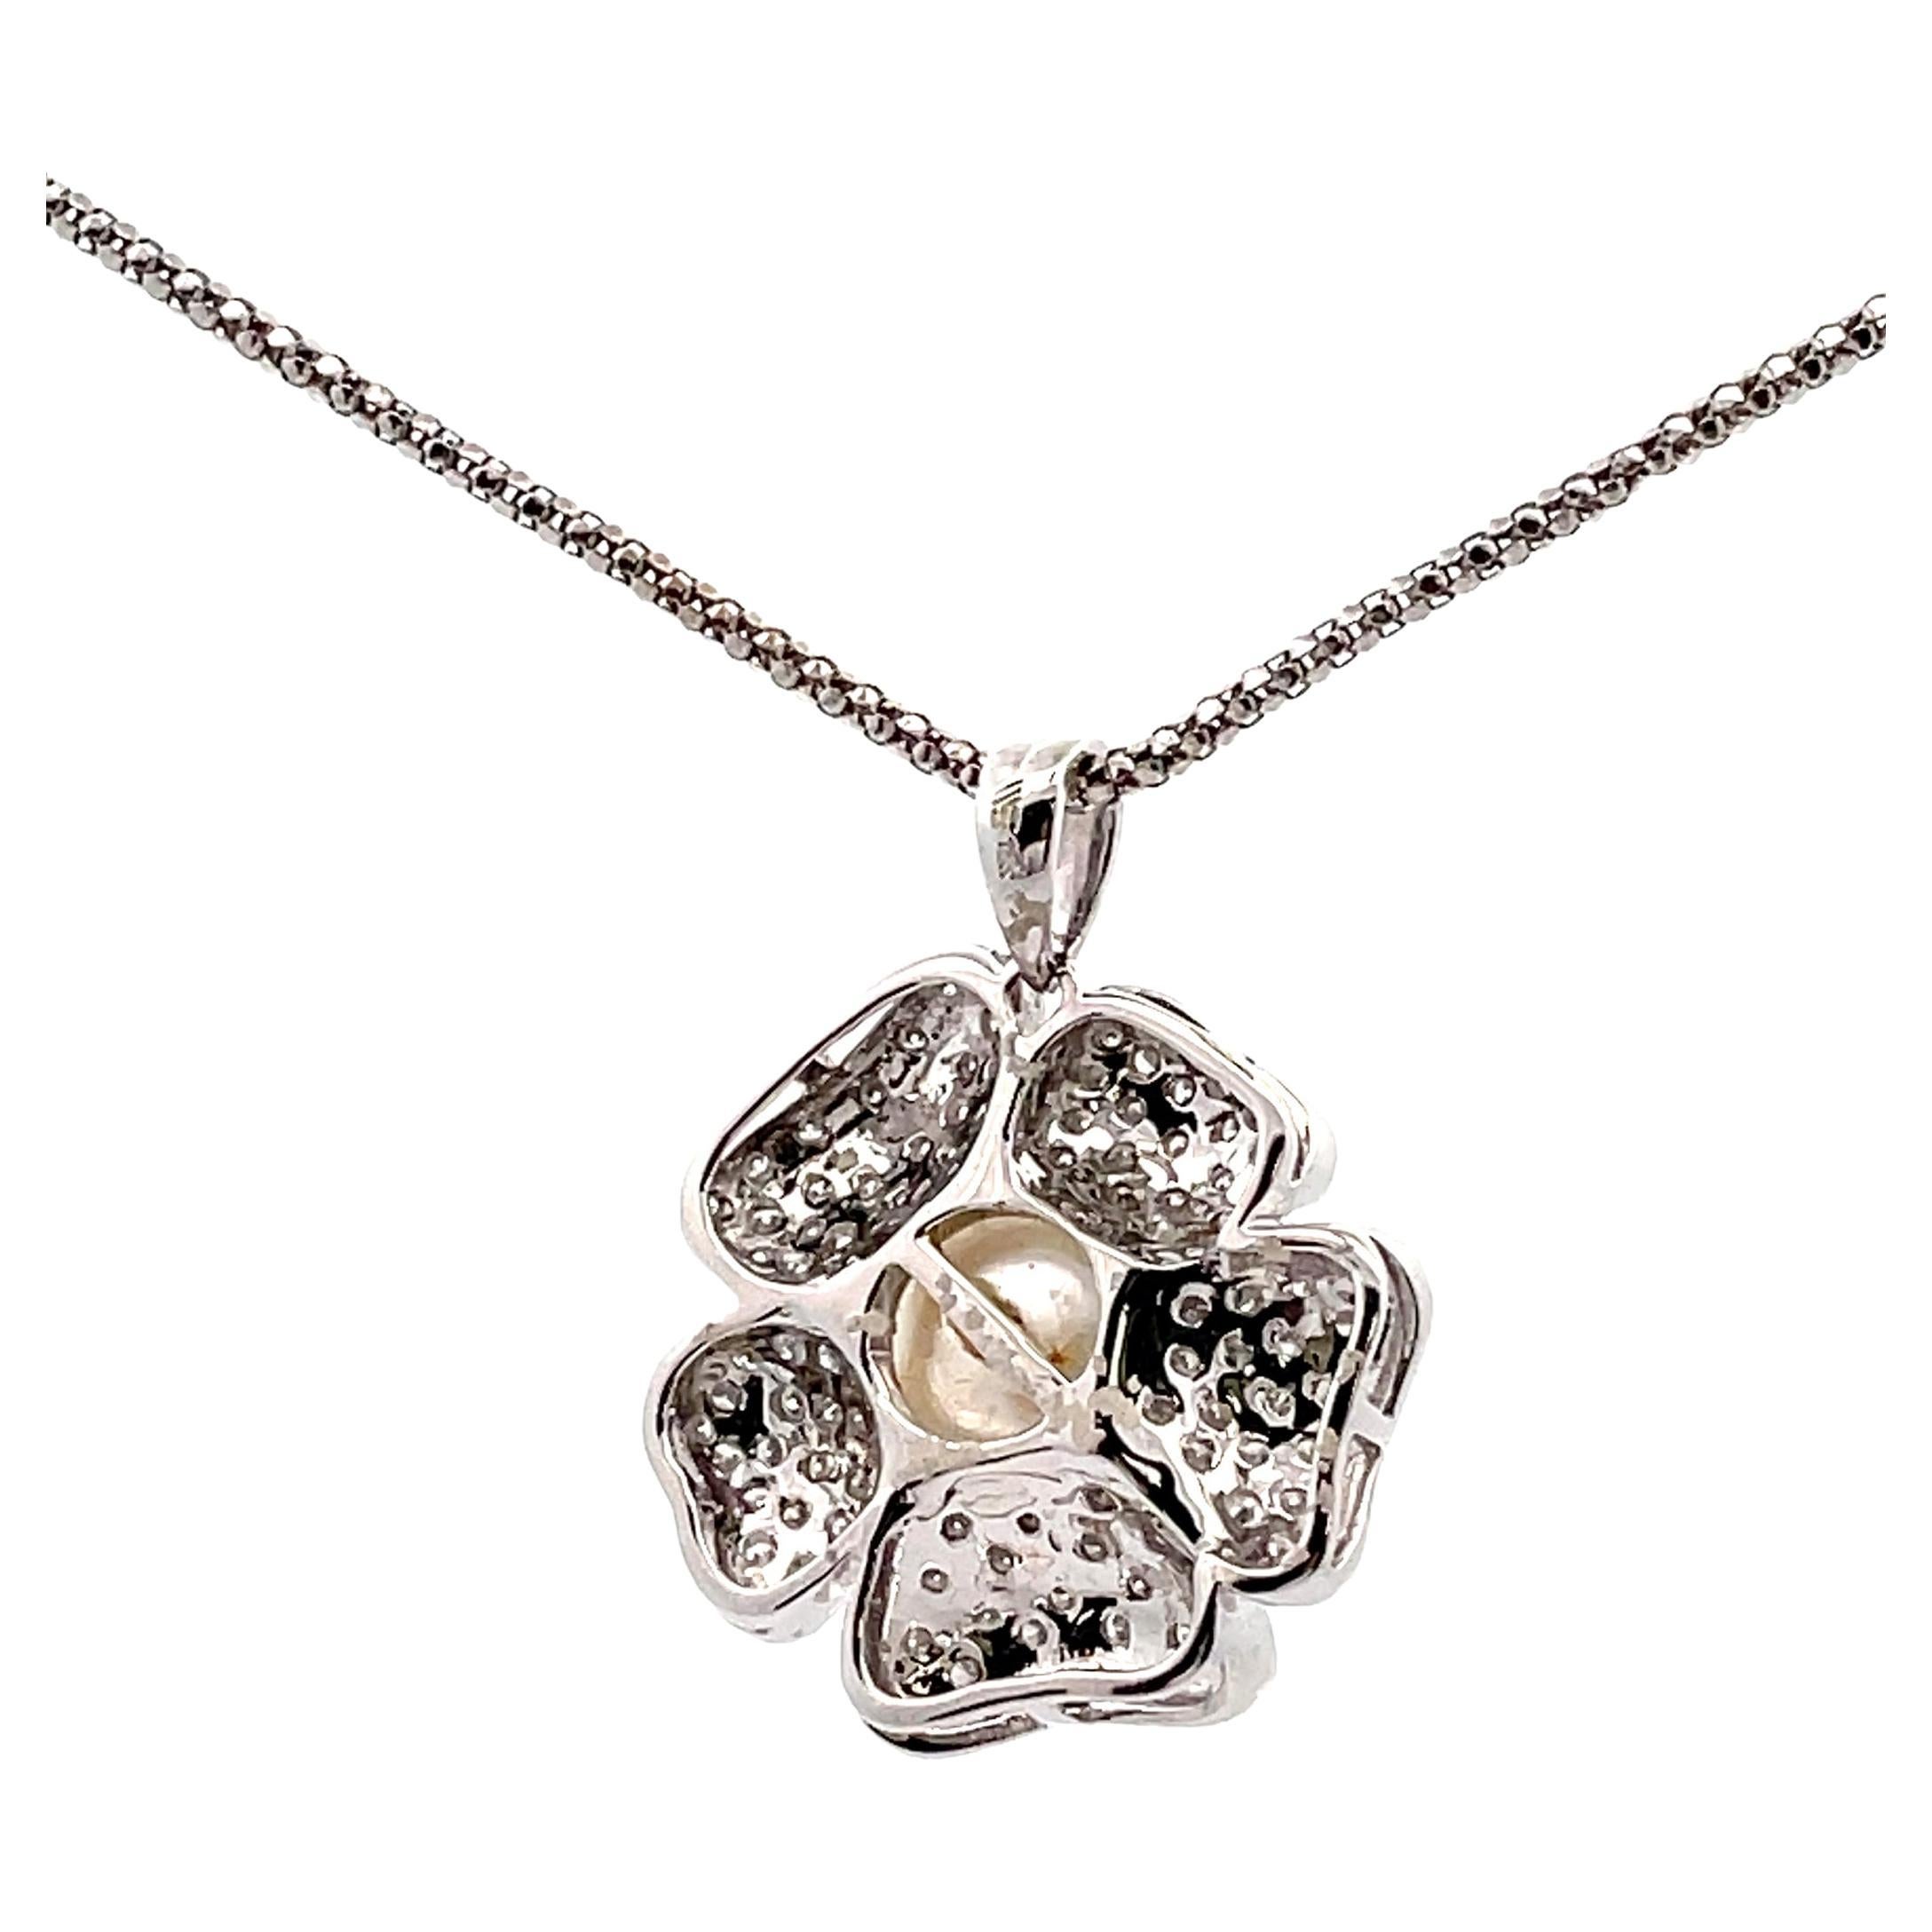 18K white gold flower pendant with 1.25 carats diamonds and one South Sea pearl meausring 14.85mm.
Pendant slides on a 14K white gold chain, 16 inches long.

* Diamonds are H color, SI clarity